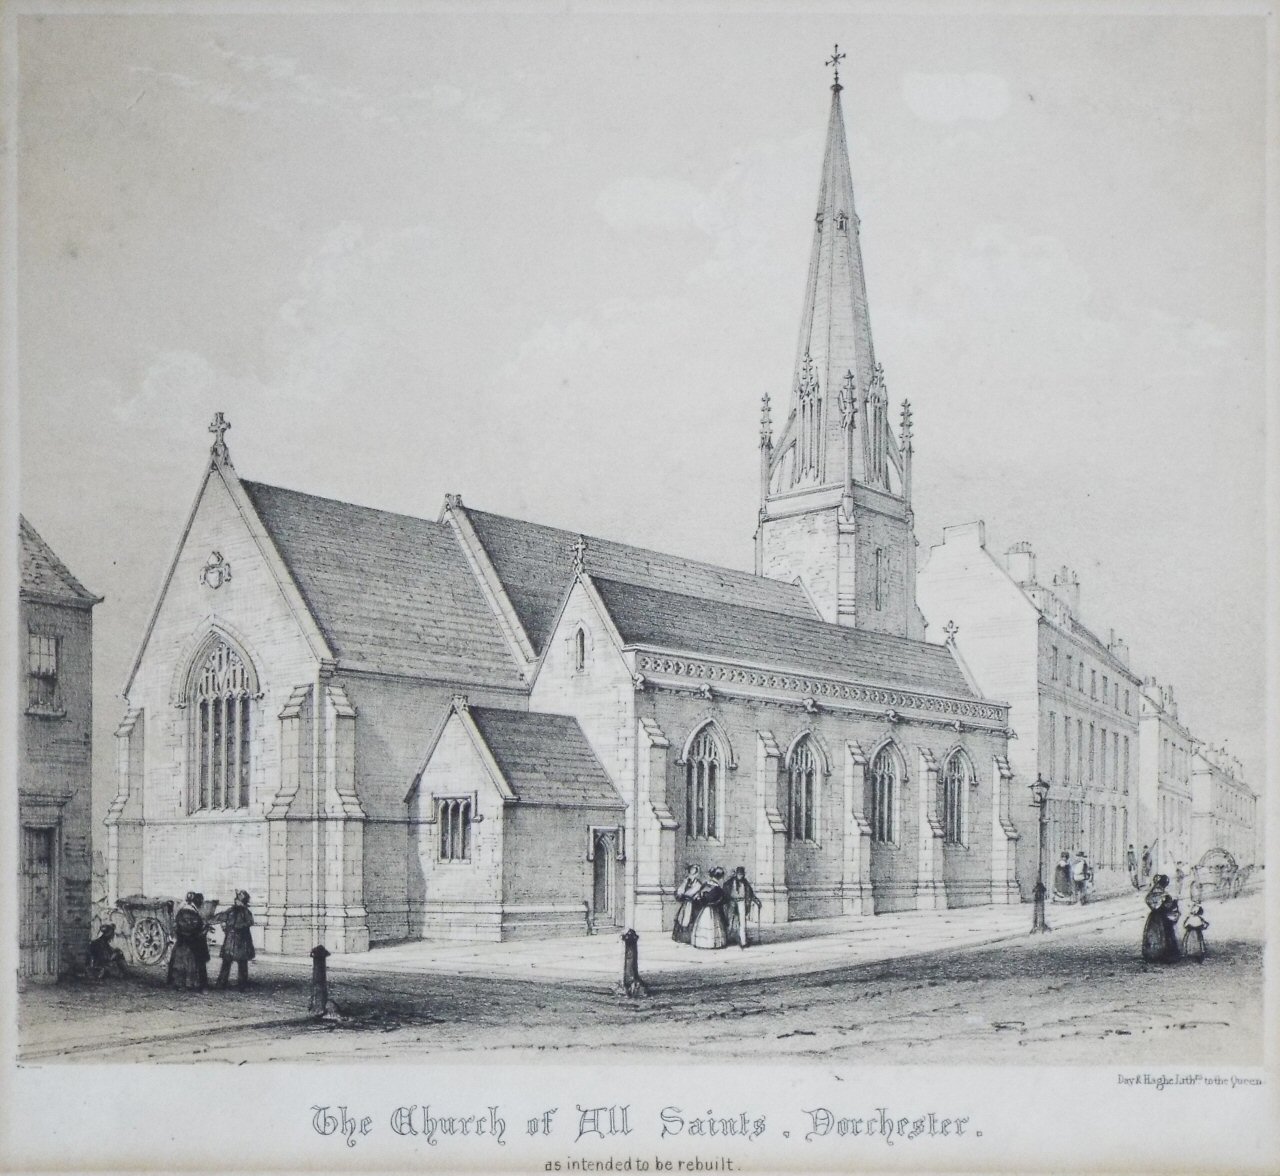 Lithograph - The Church of All Saints, Dorchester. as intended to be rebuilt.